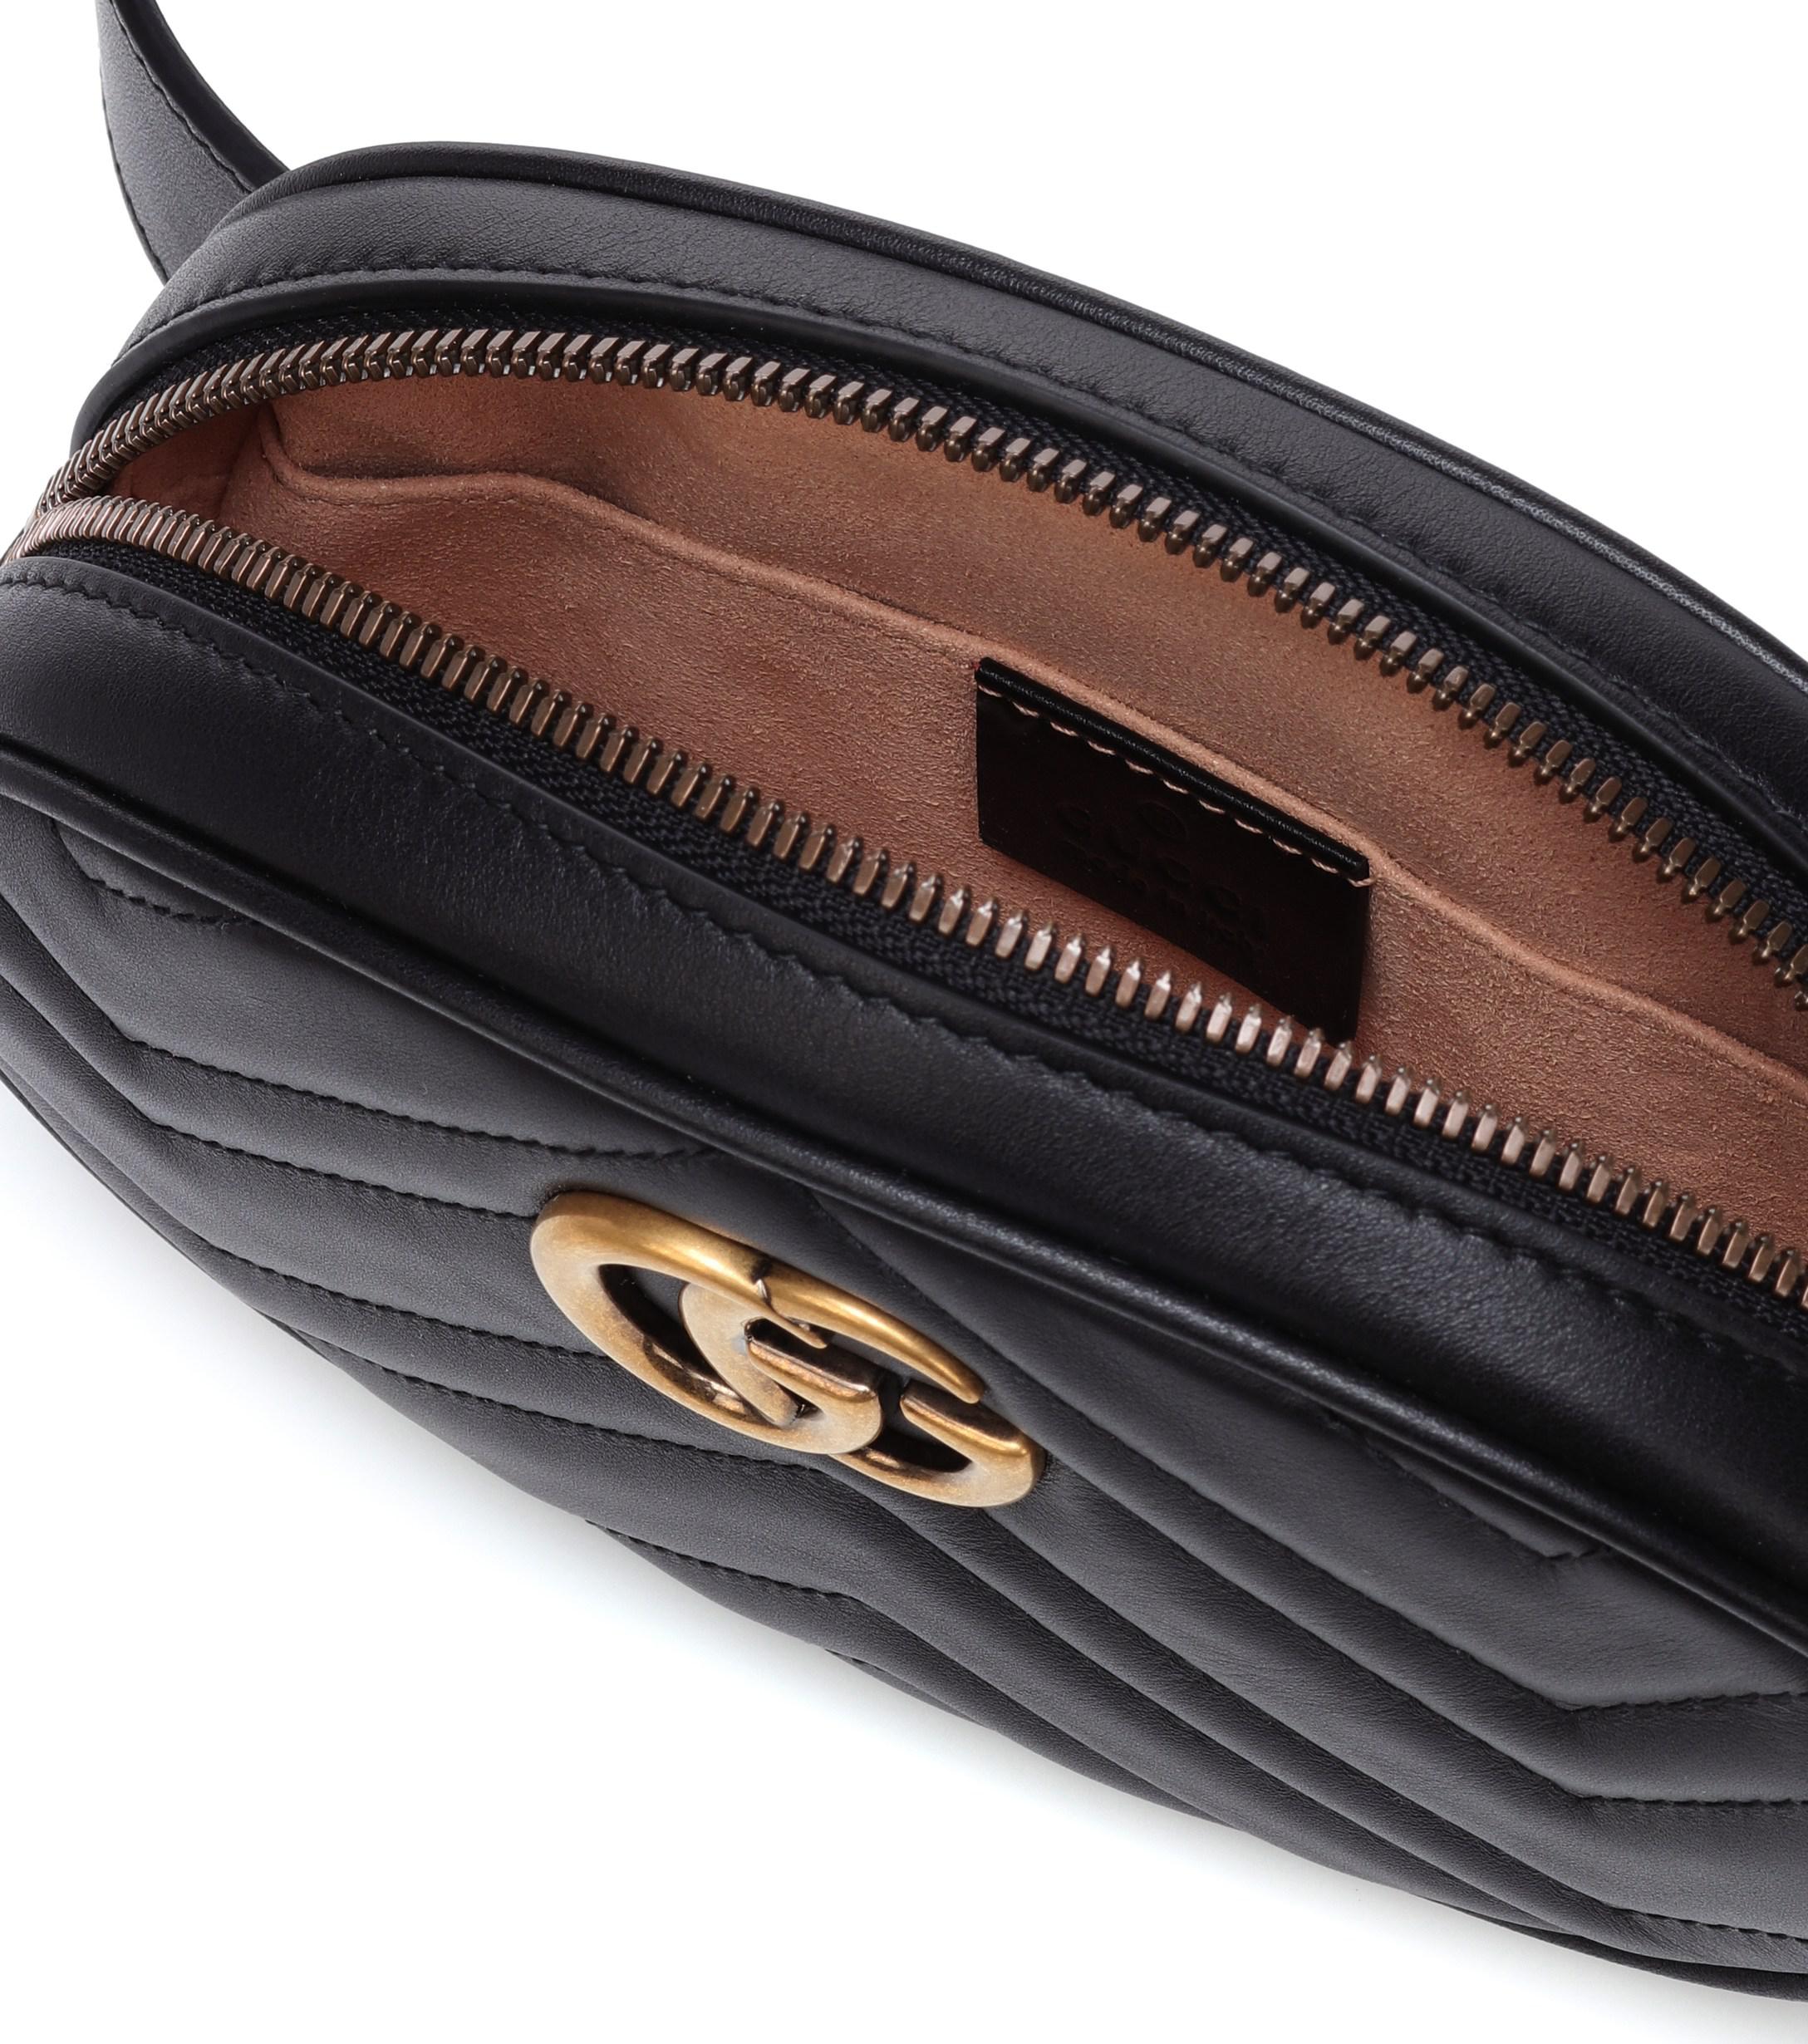 Gucci GG Marmont Small Matelasse Leather Belt Bag in Black - Lyst